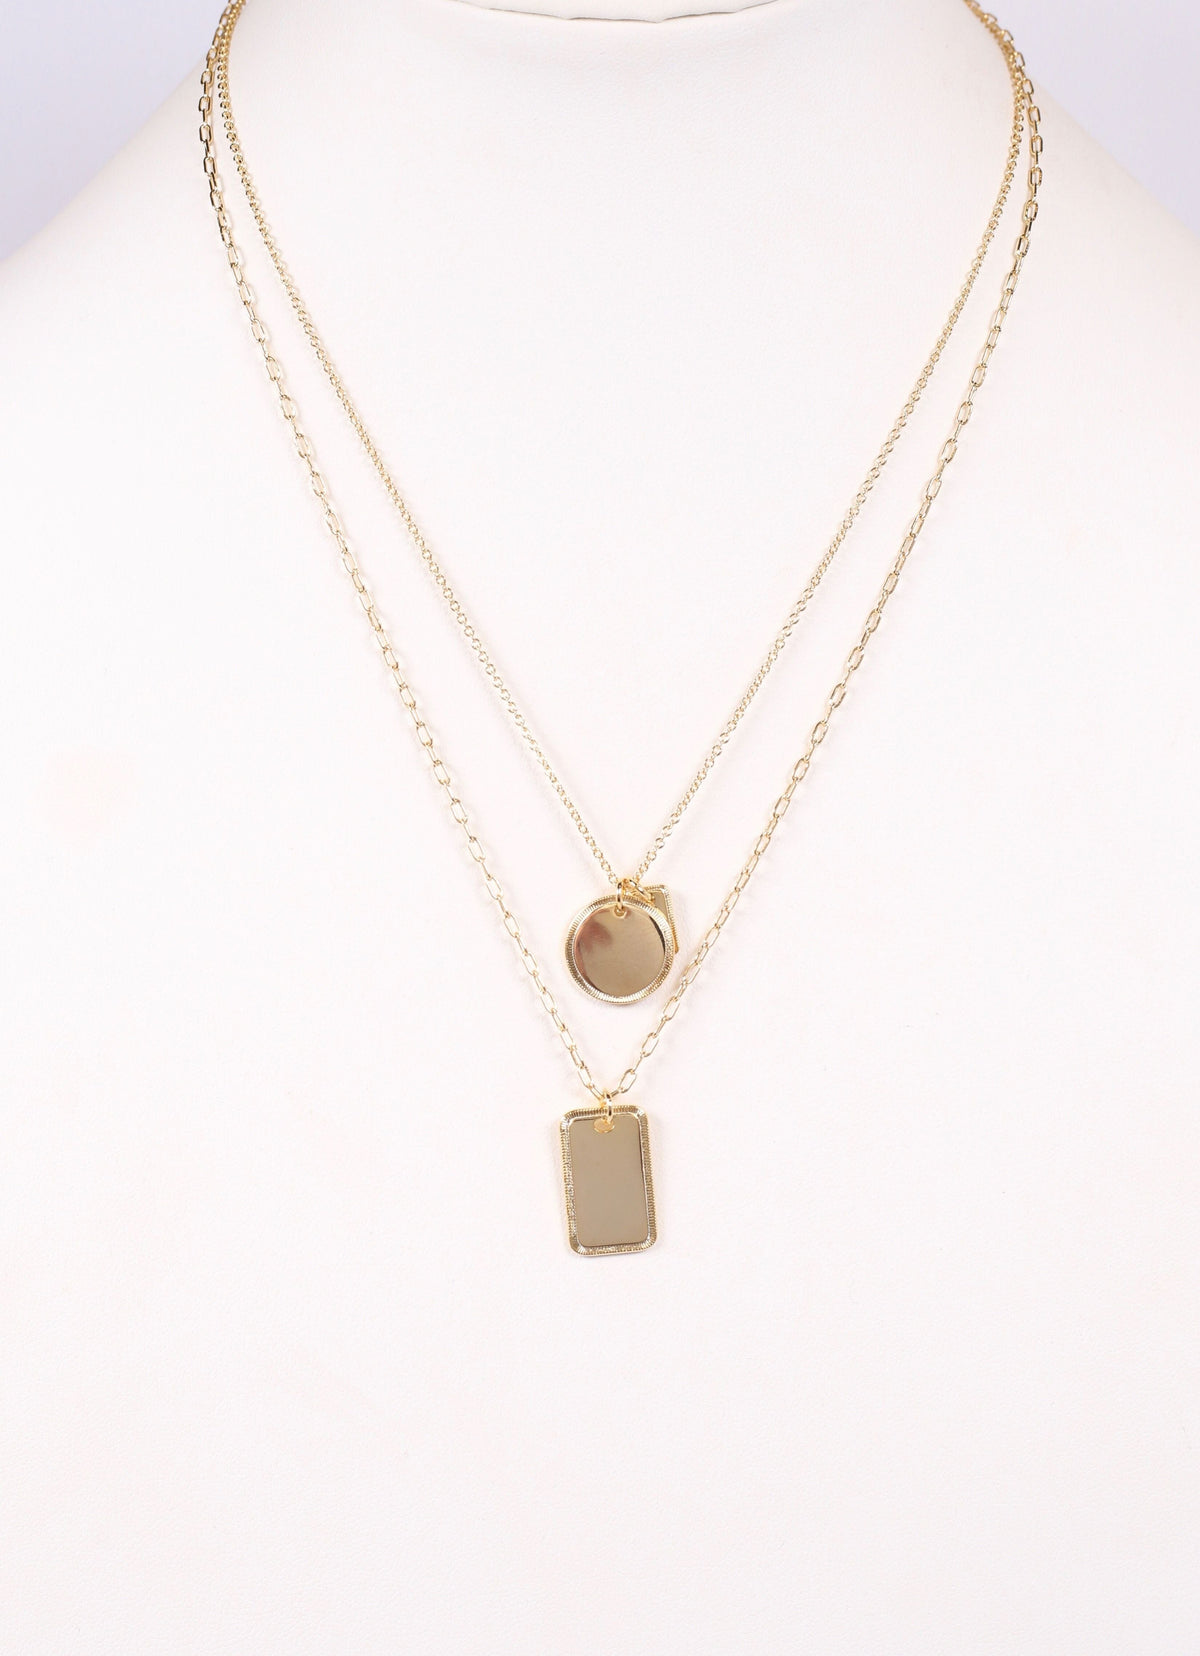 Woodinville Layered Necklace with Accents GOLD - Caroline Hill